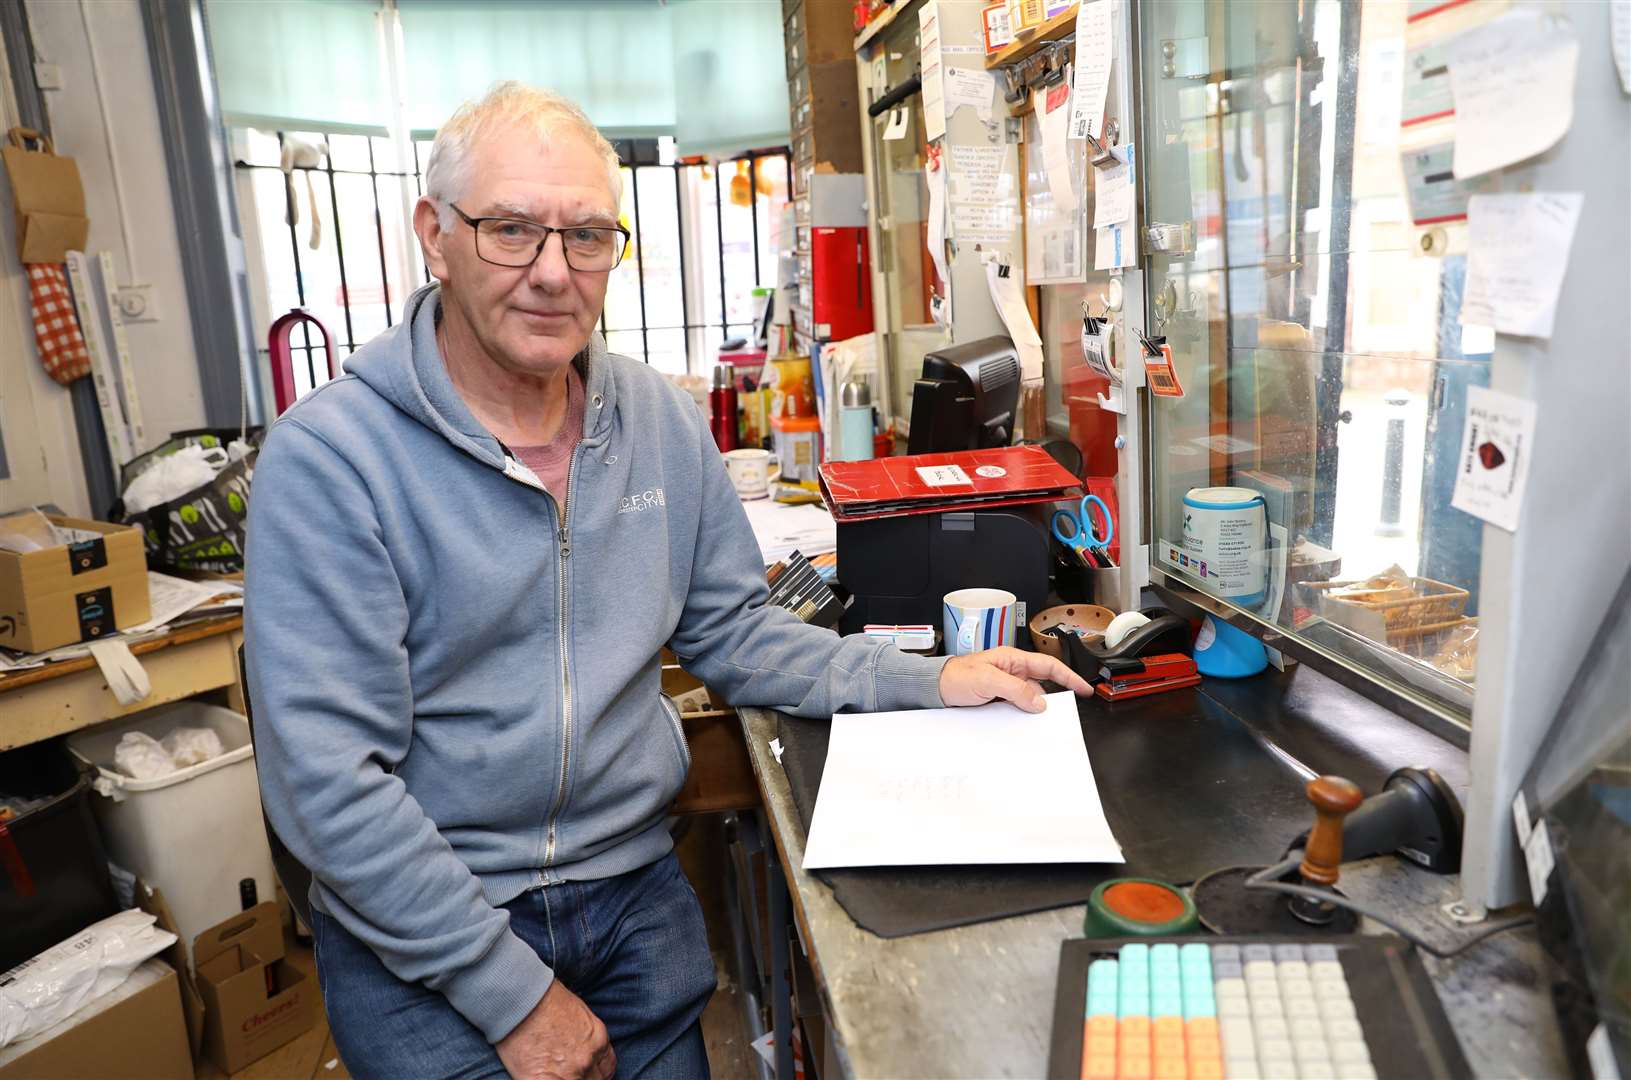 Yalding sub-postmaster Tim Chapman fears for the future if his subsidy is cut. Picture: Andy Jones